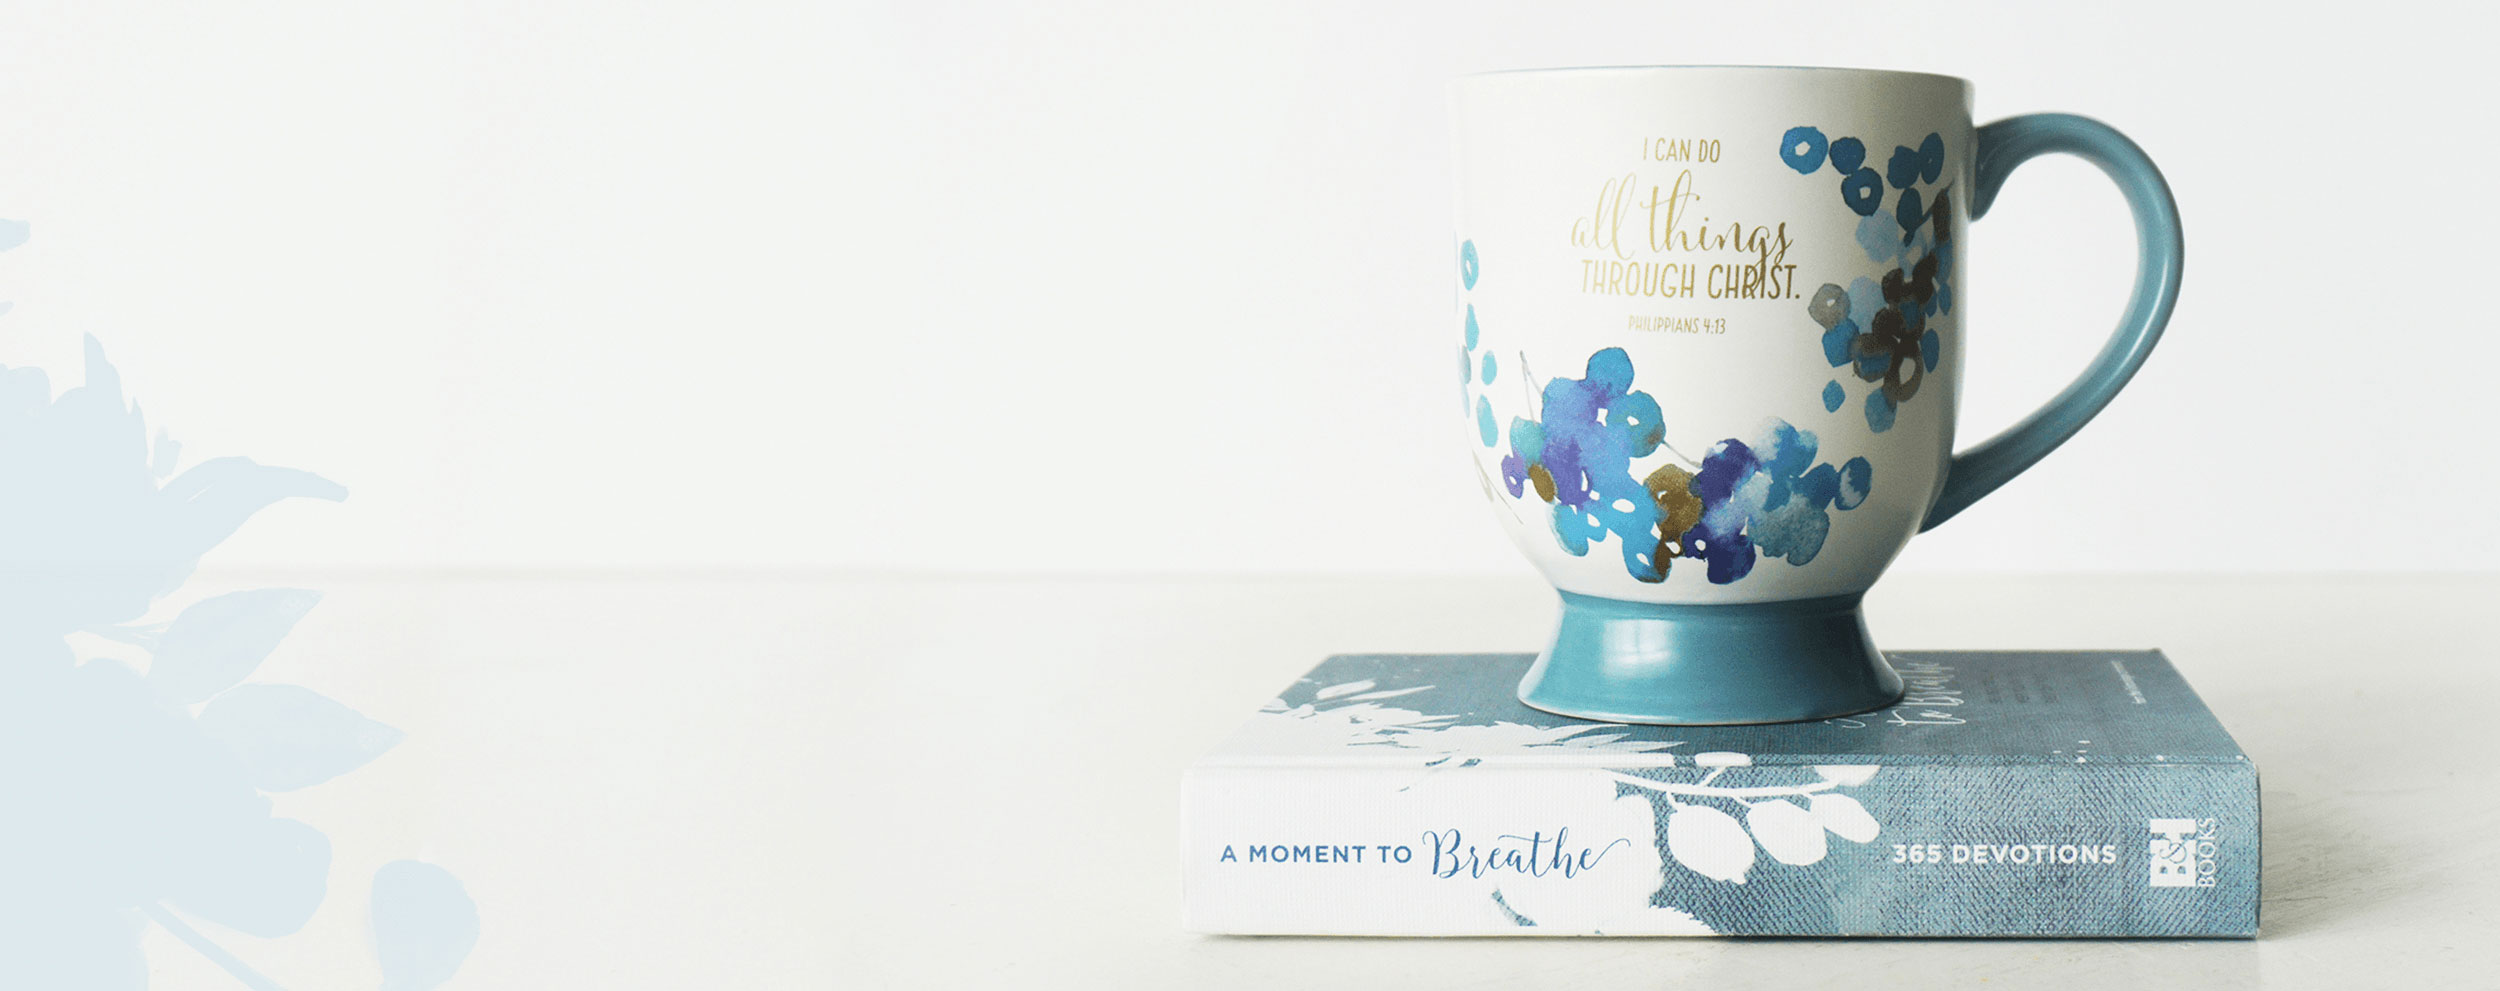 A Moment to Breathe Book and Mug